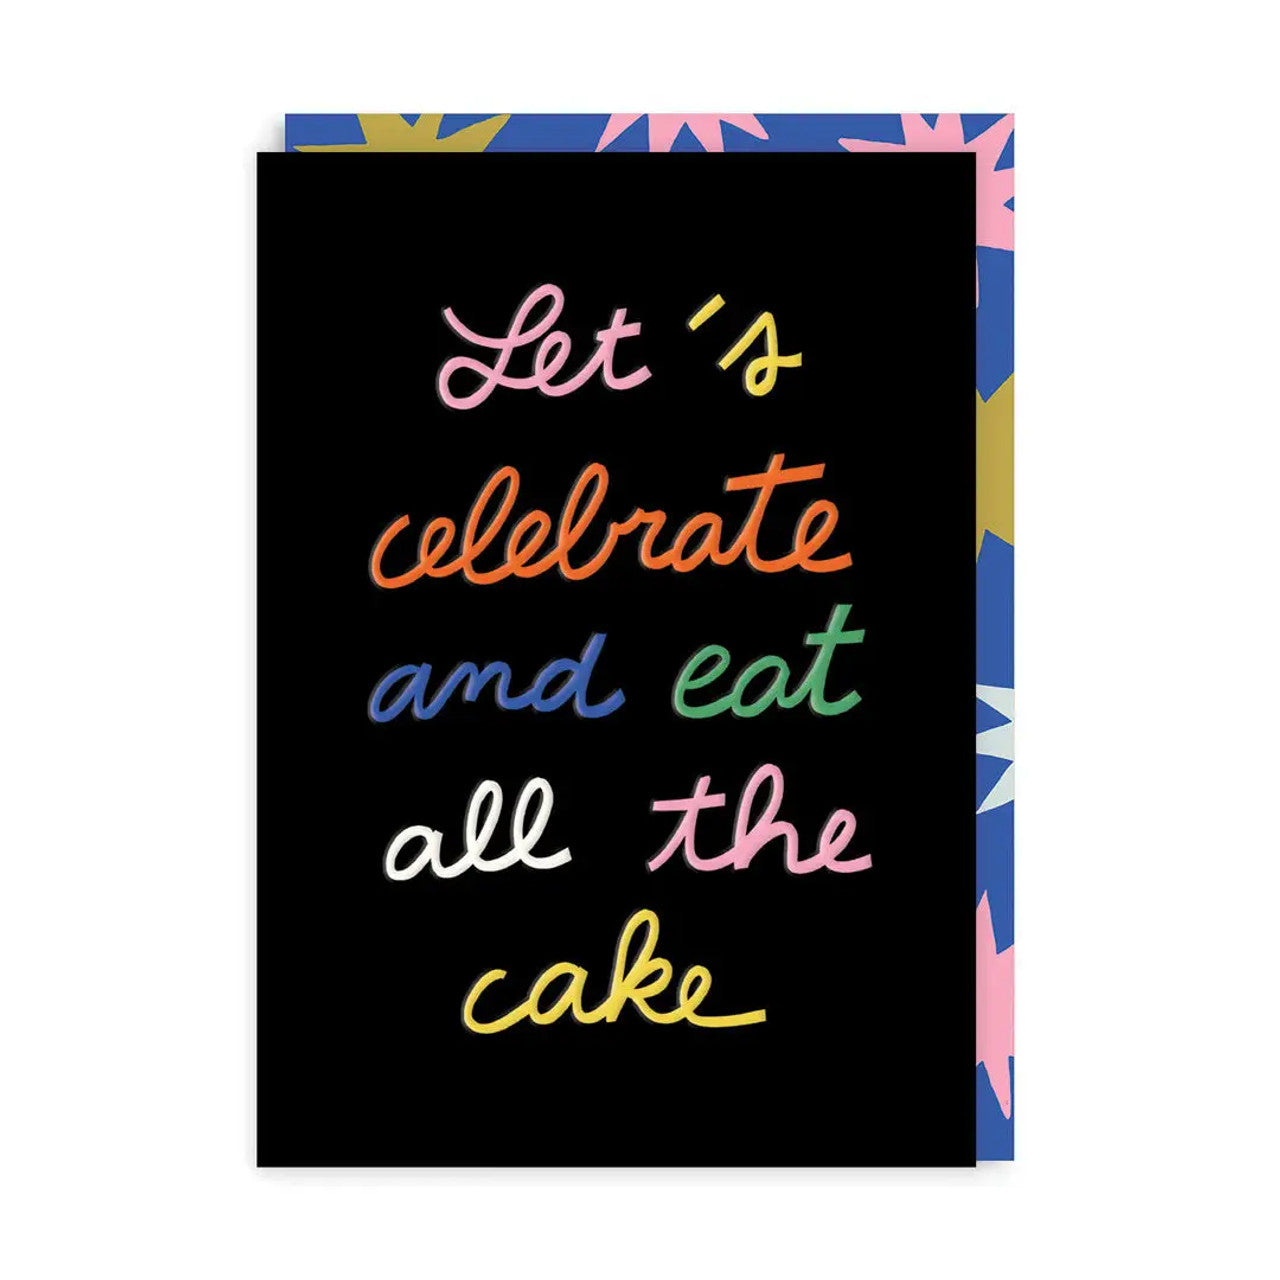 Let's Celebrate Birthday Card text reads "Let's Celebrate and eat all the cake"